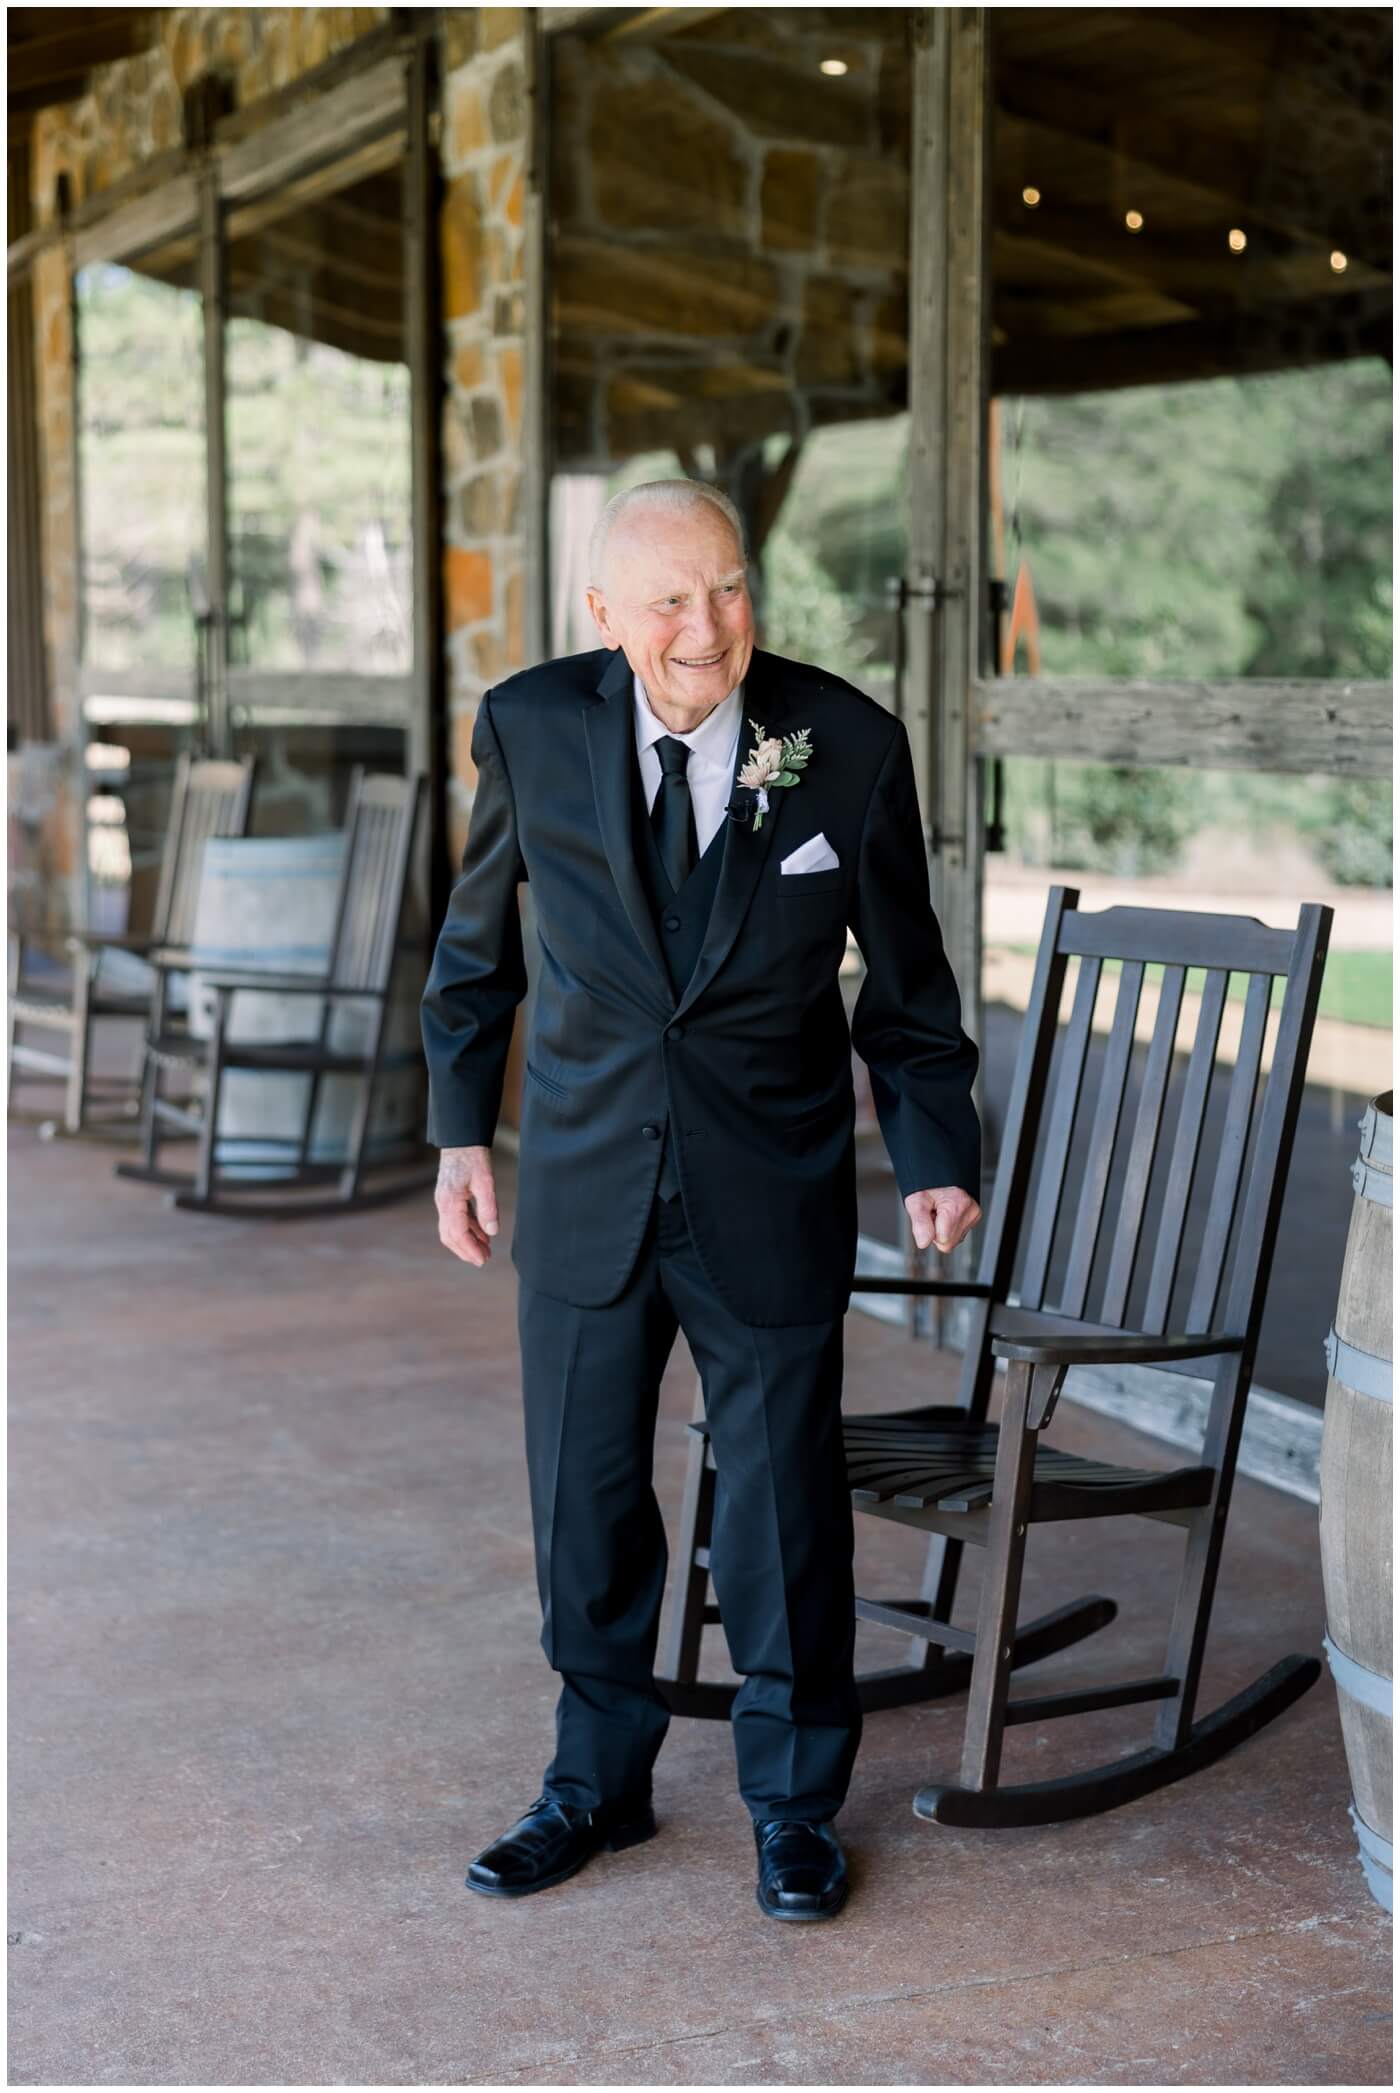 A bride shares a first look with her grandfather on her wedding day.